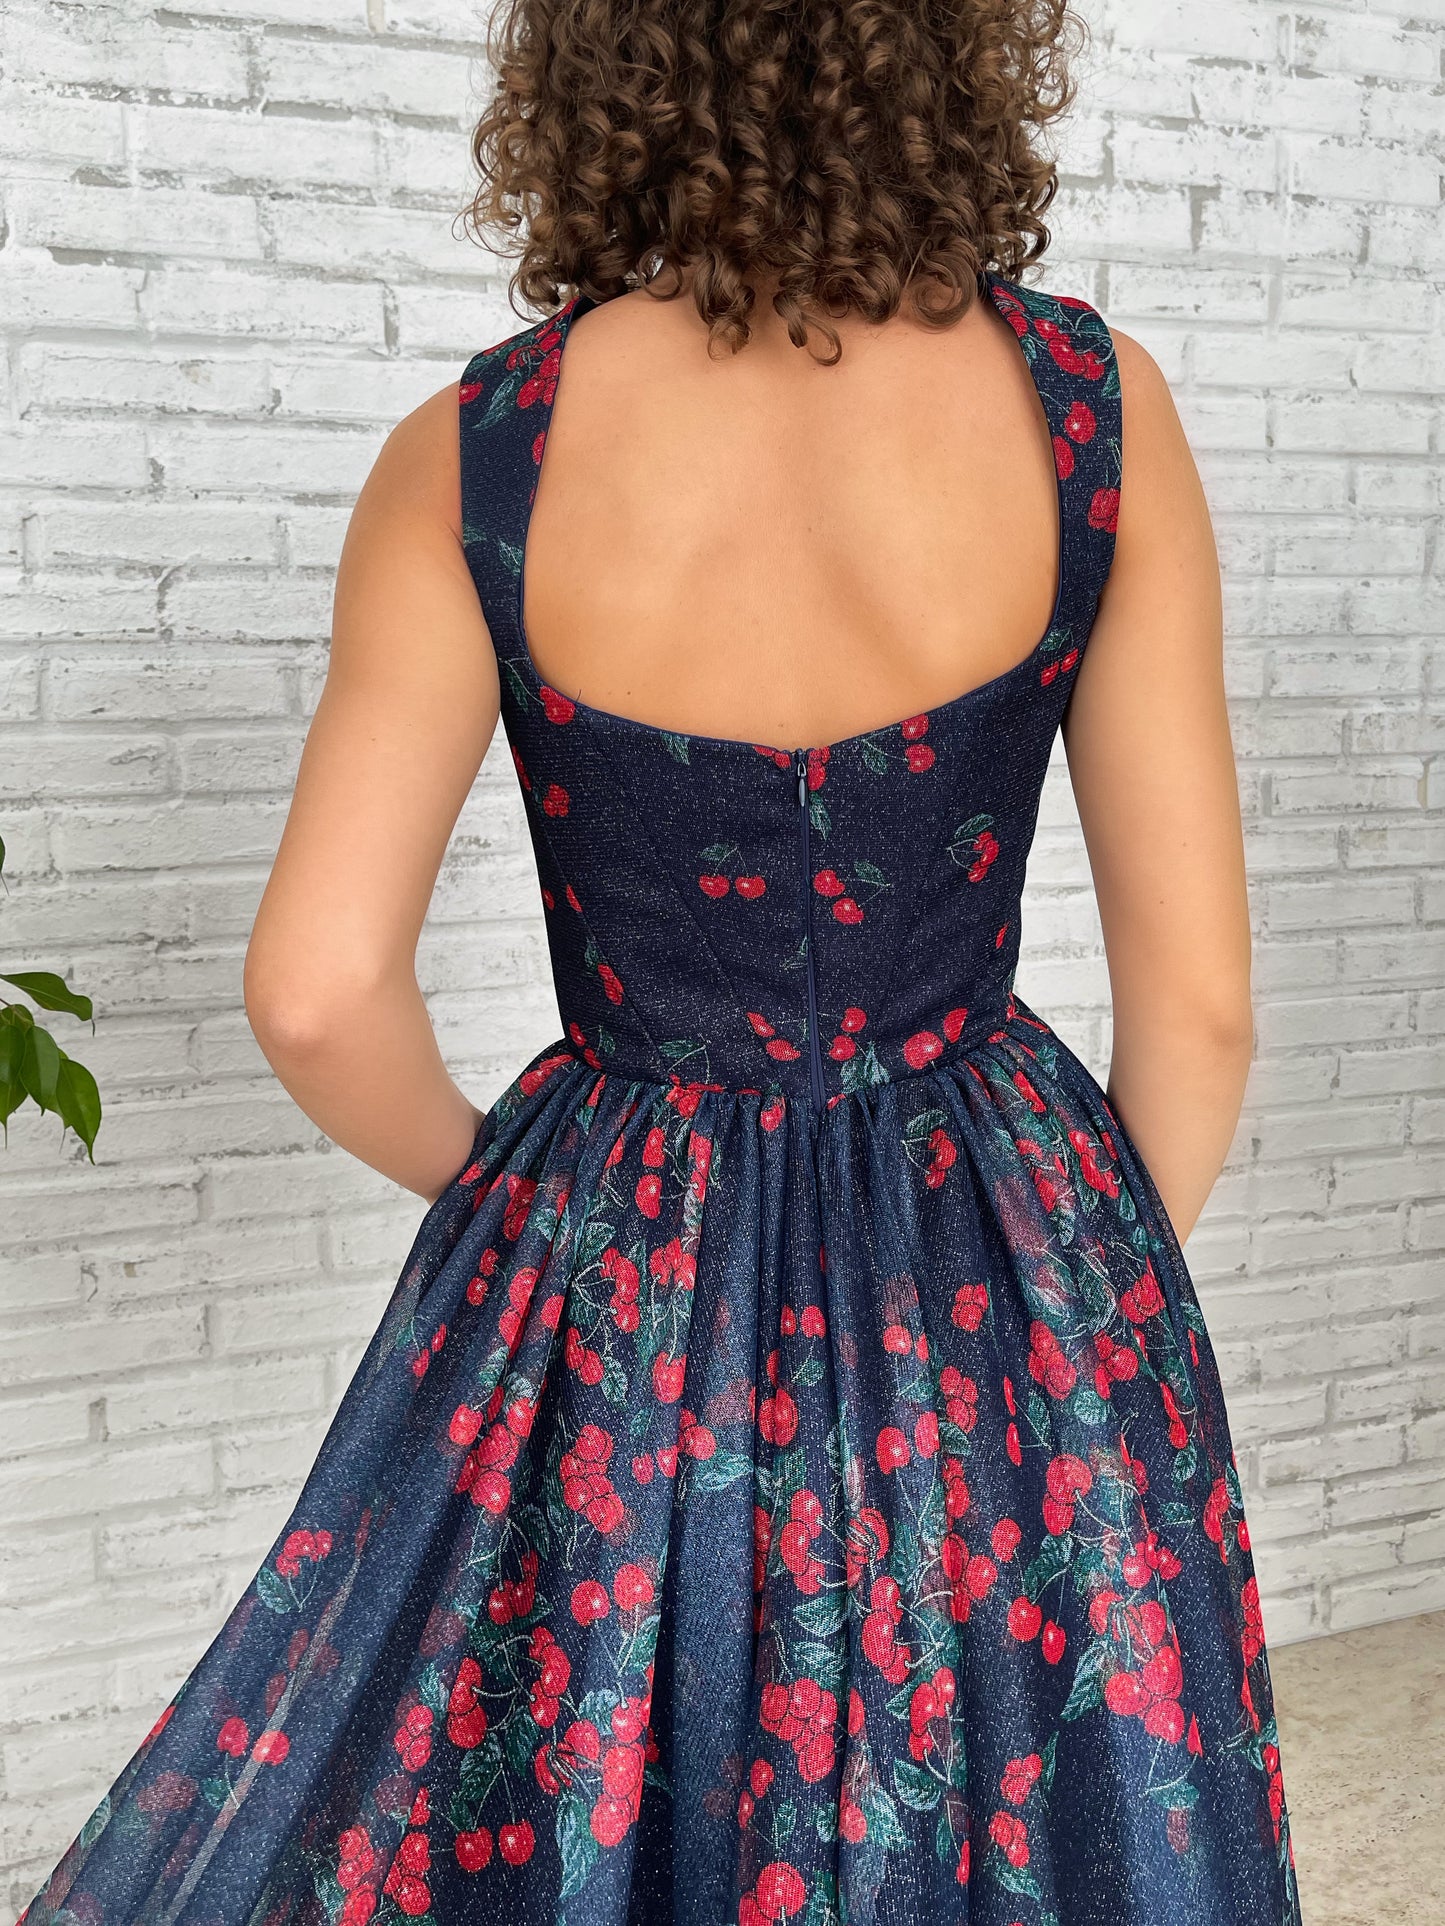 Blue midi dress with printed cherries and straps